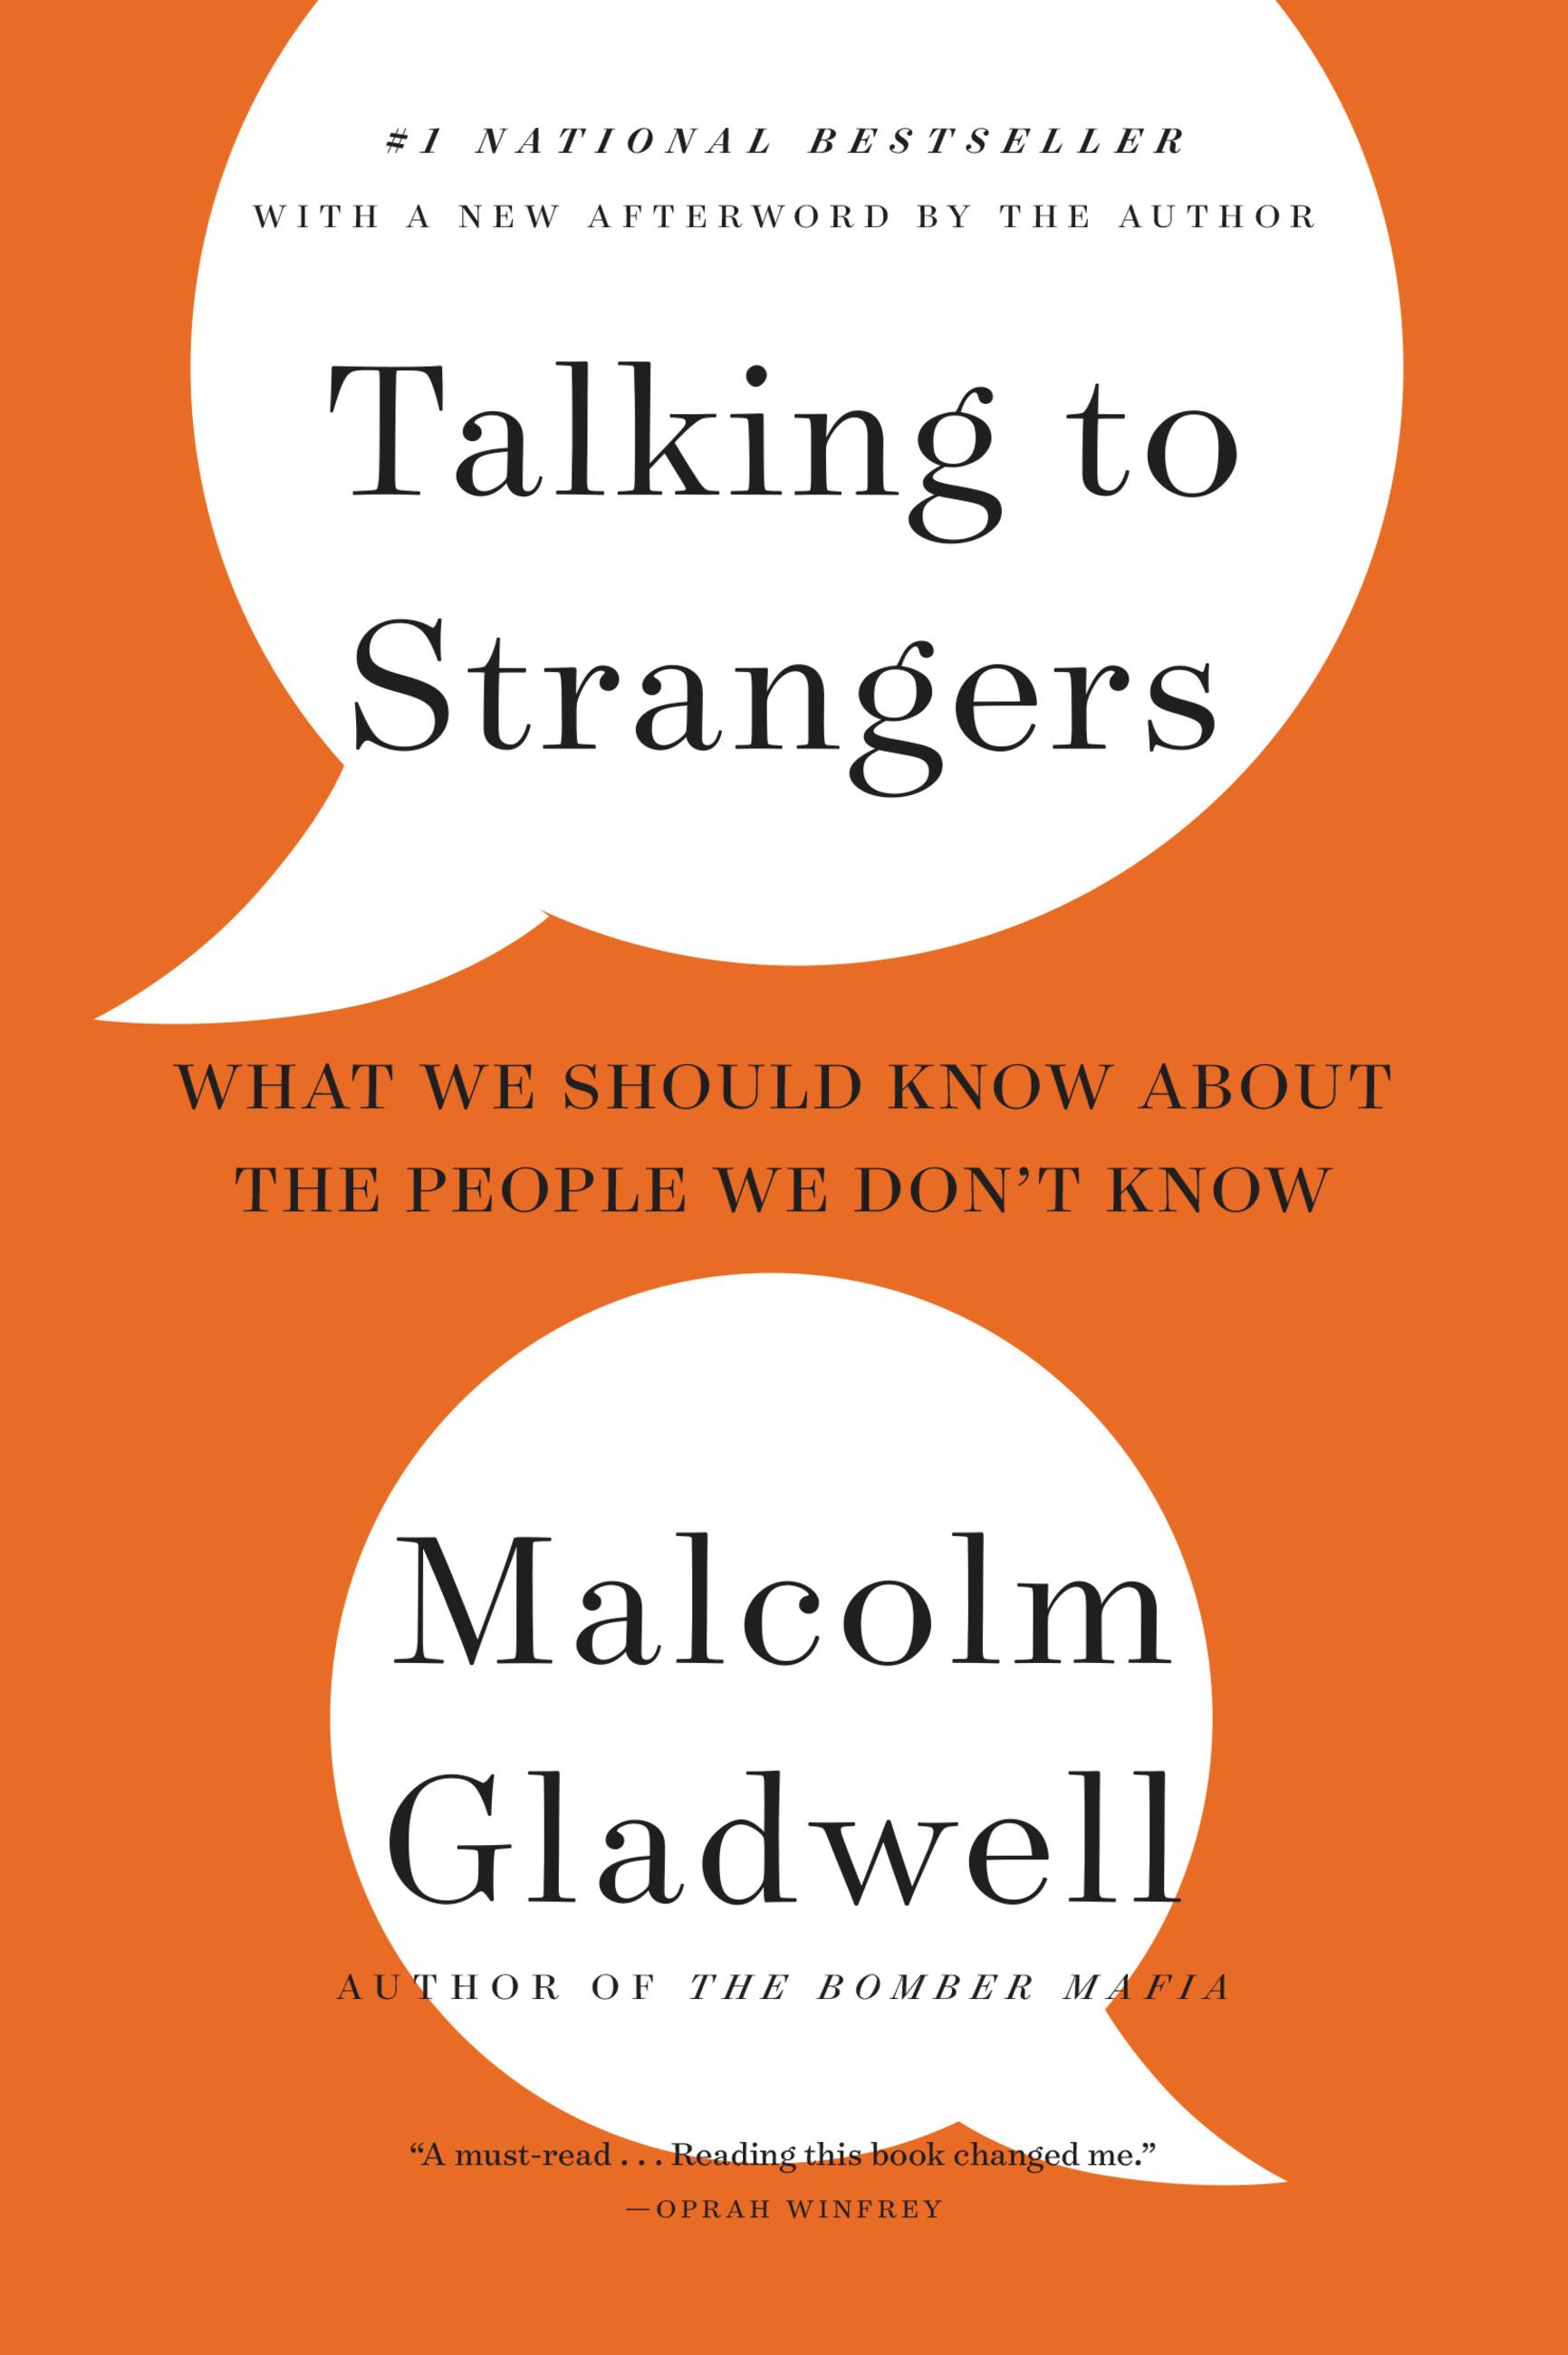 Talking to Strangers : What We Should Know about the People We Don't Know (Hardcover) - image 1 of 1